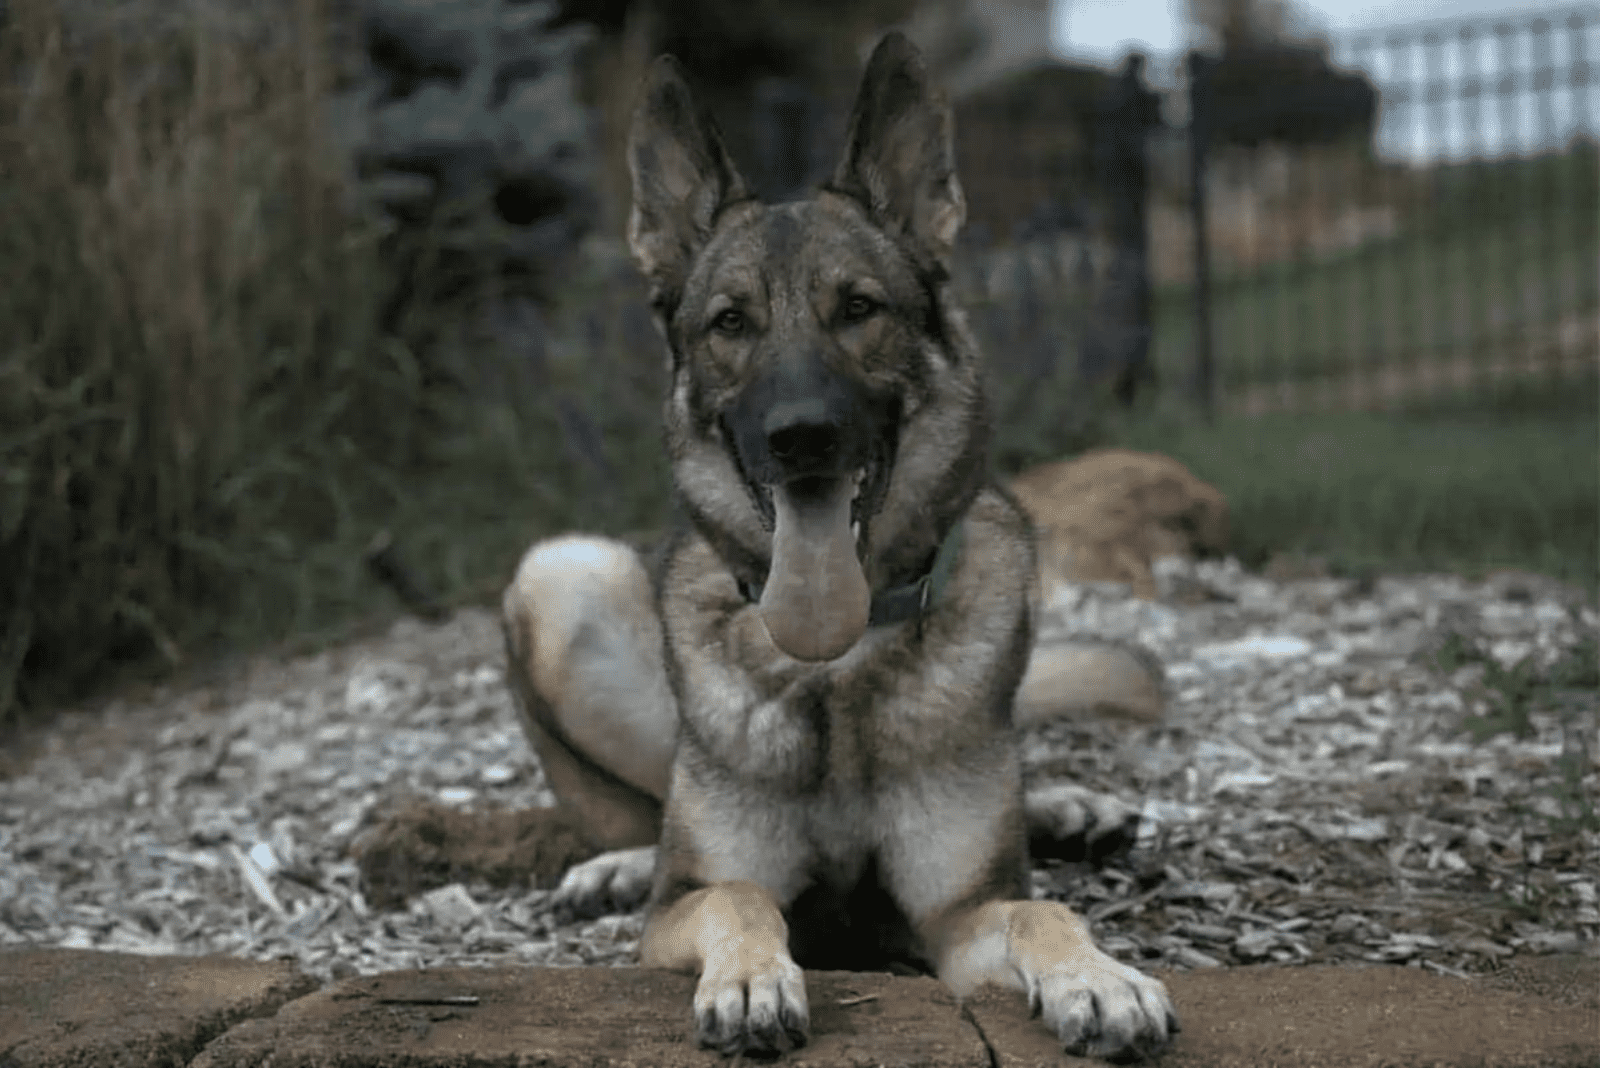 Czech German Shepherd sits and rests